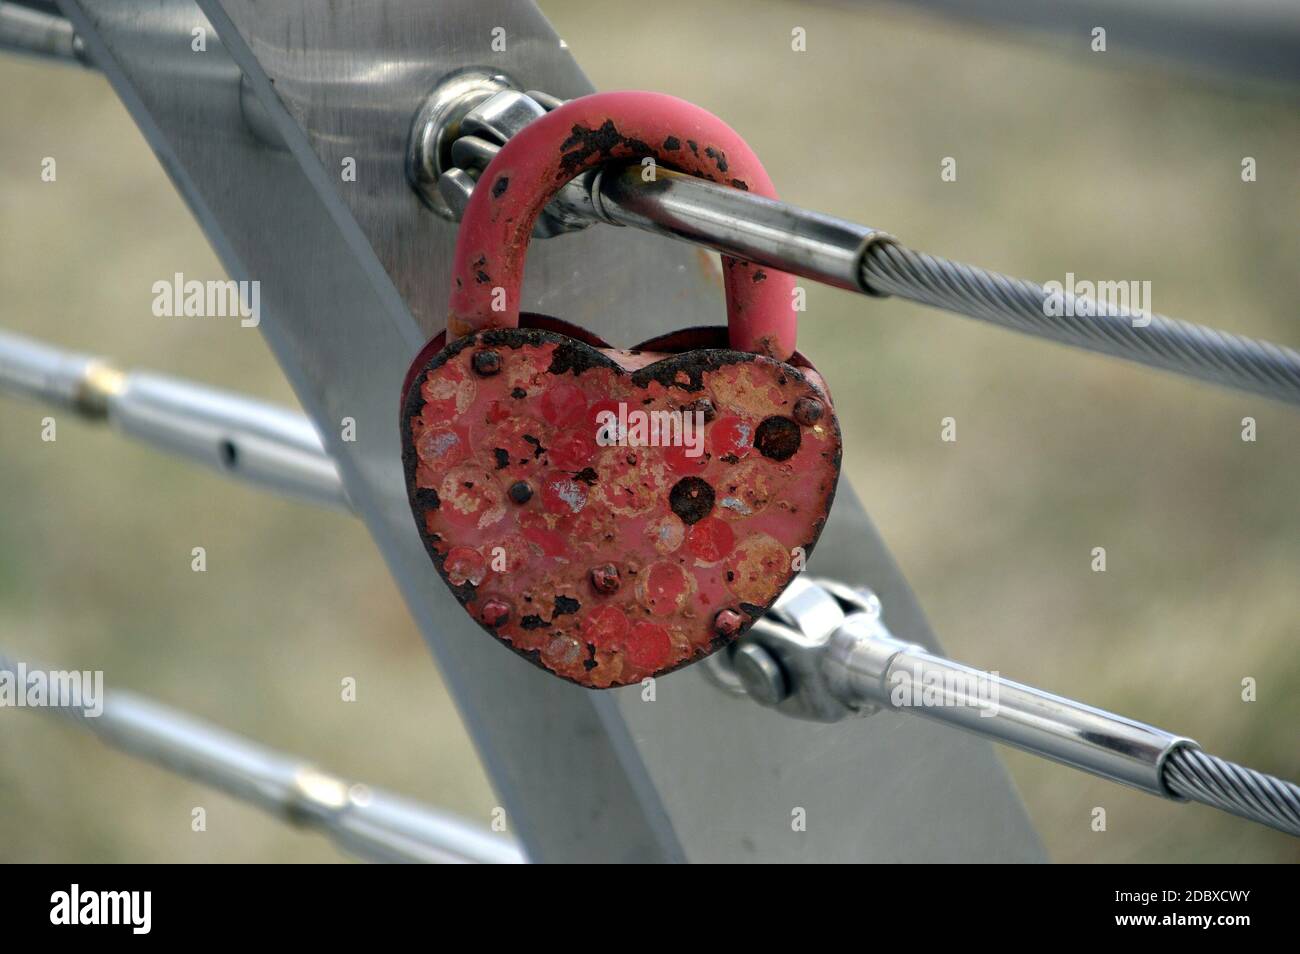 Old rusty red heart-shaped padlock hanging on a metal fence outdoors Stock Photo